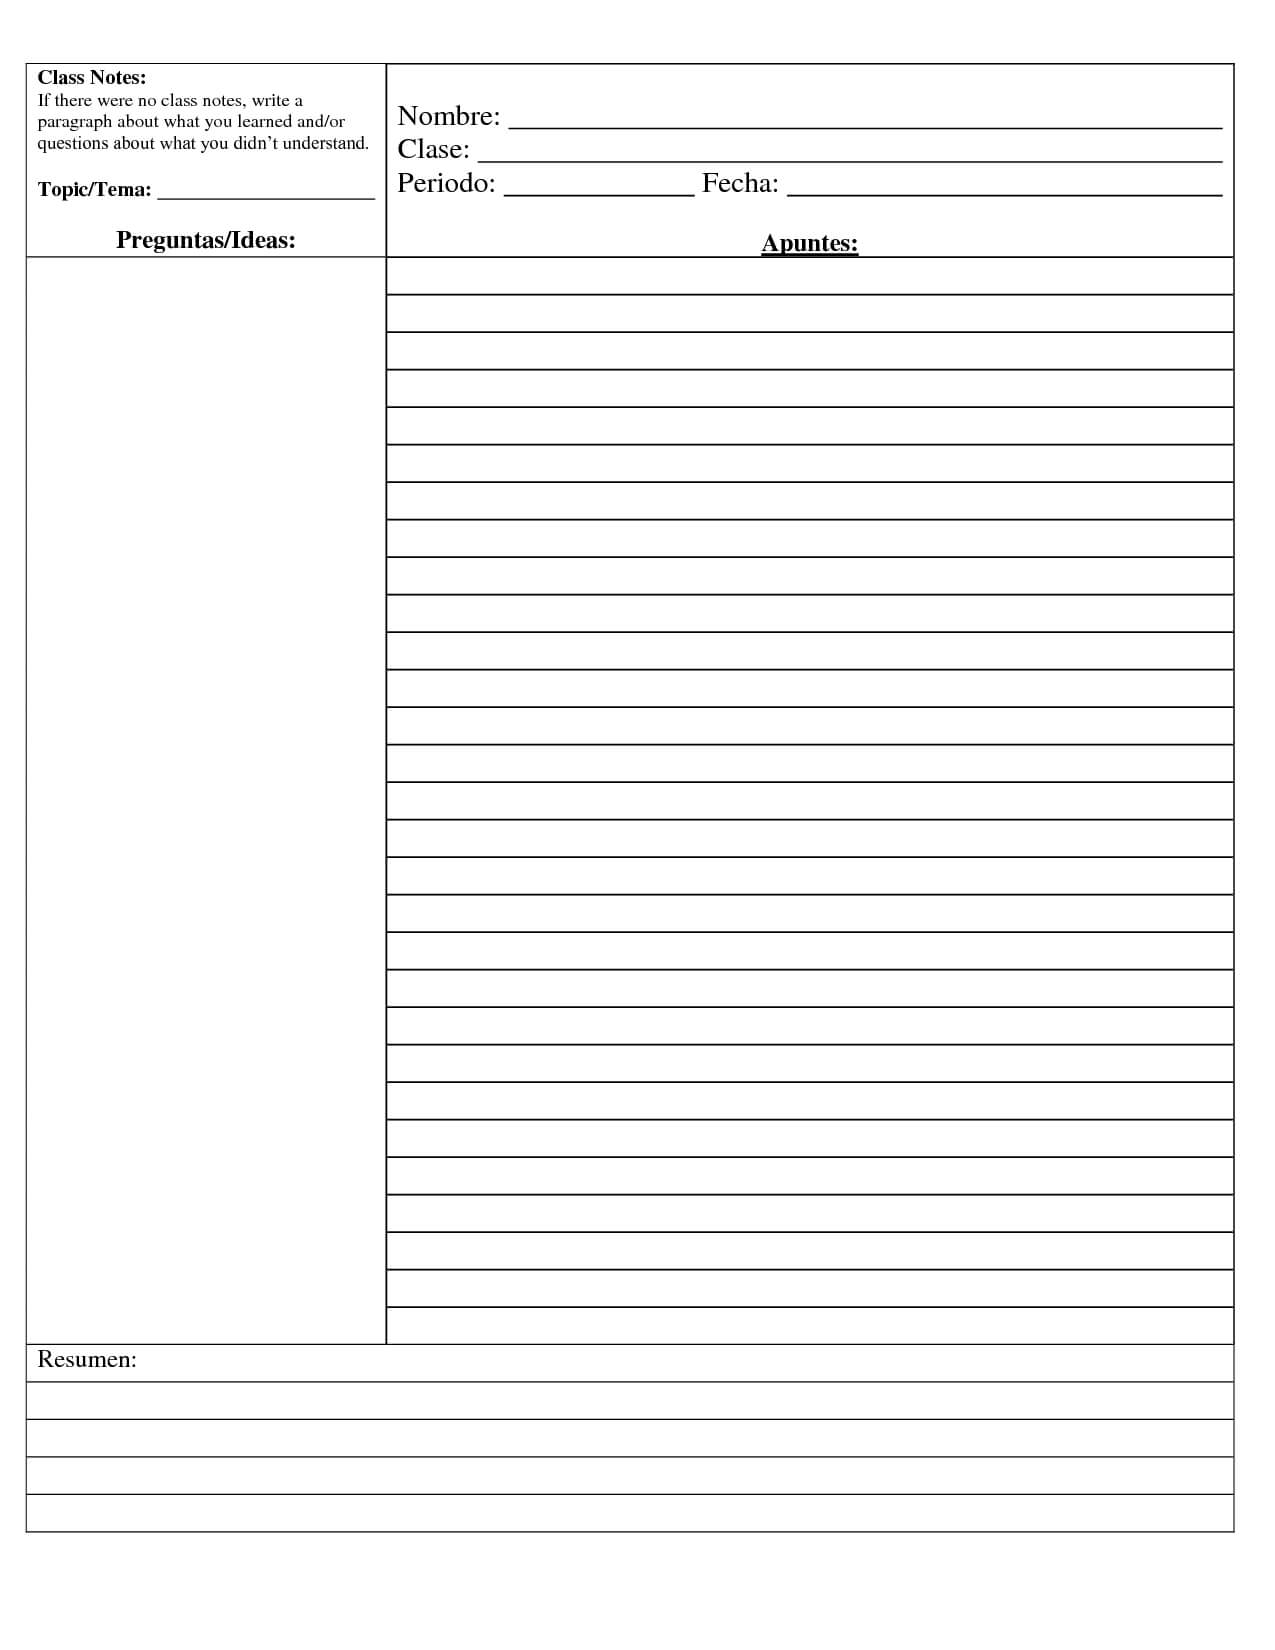 Doc 585734 Cornell Note Template Cornell Notes Best Cornell With Regard To Avid Cornell Notes Template Pdf